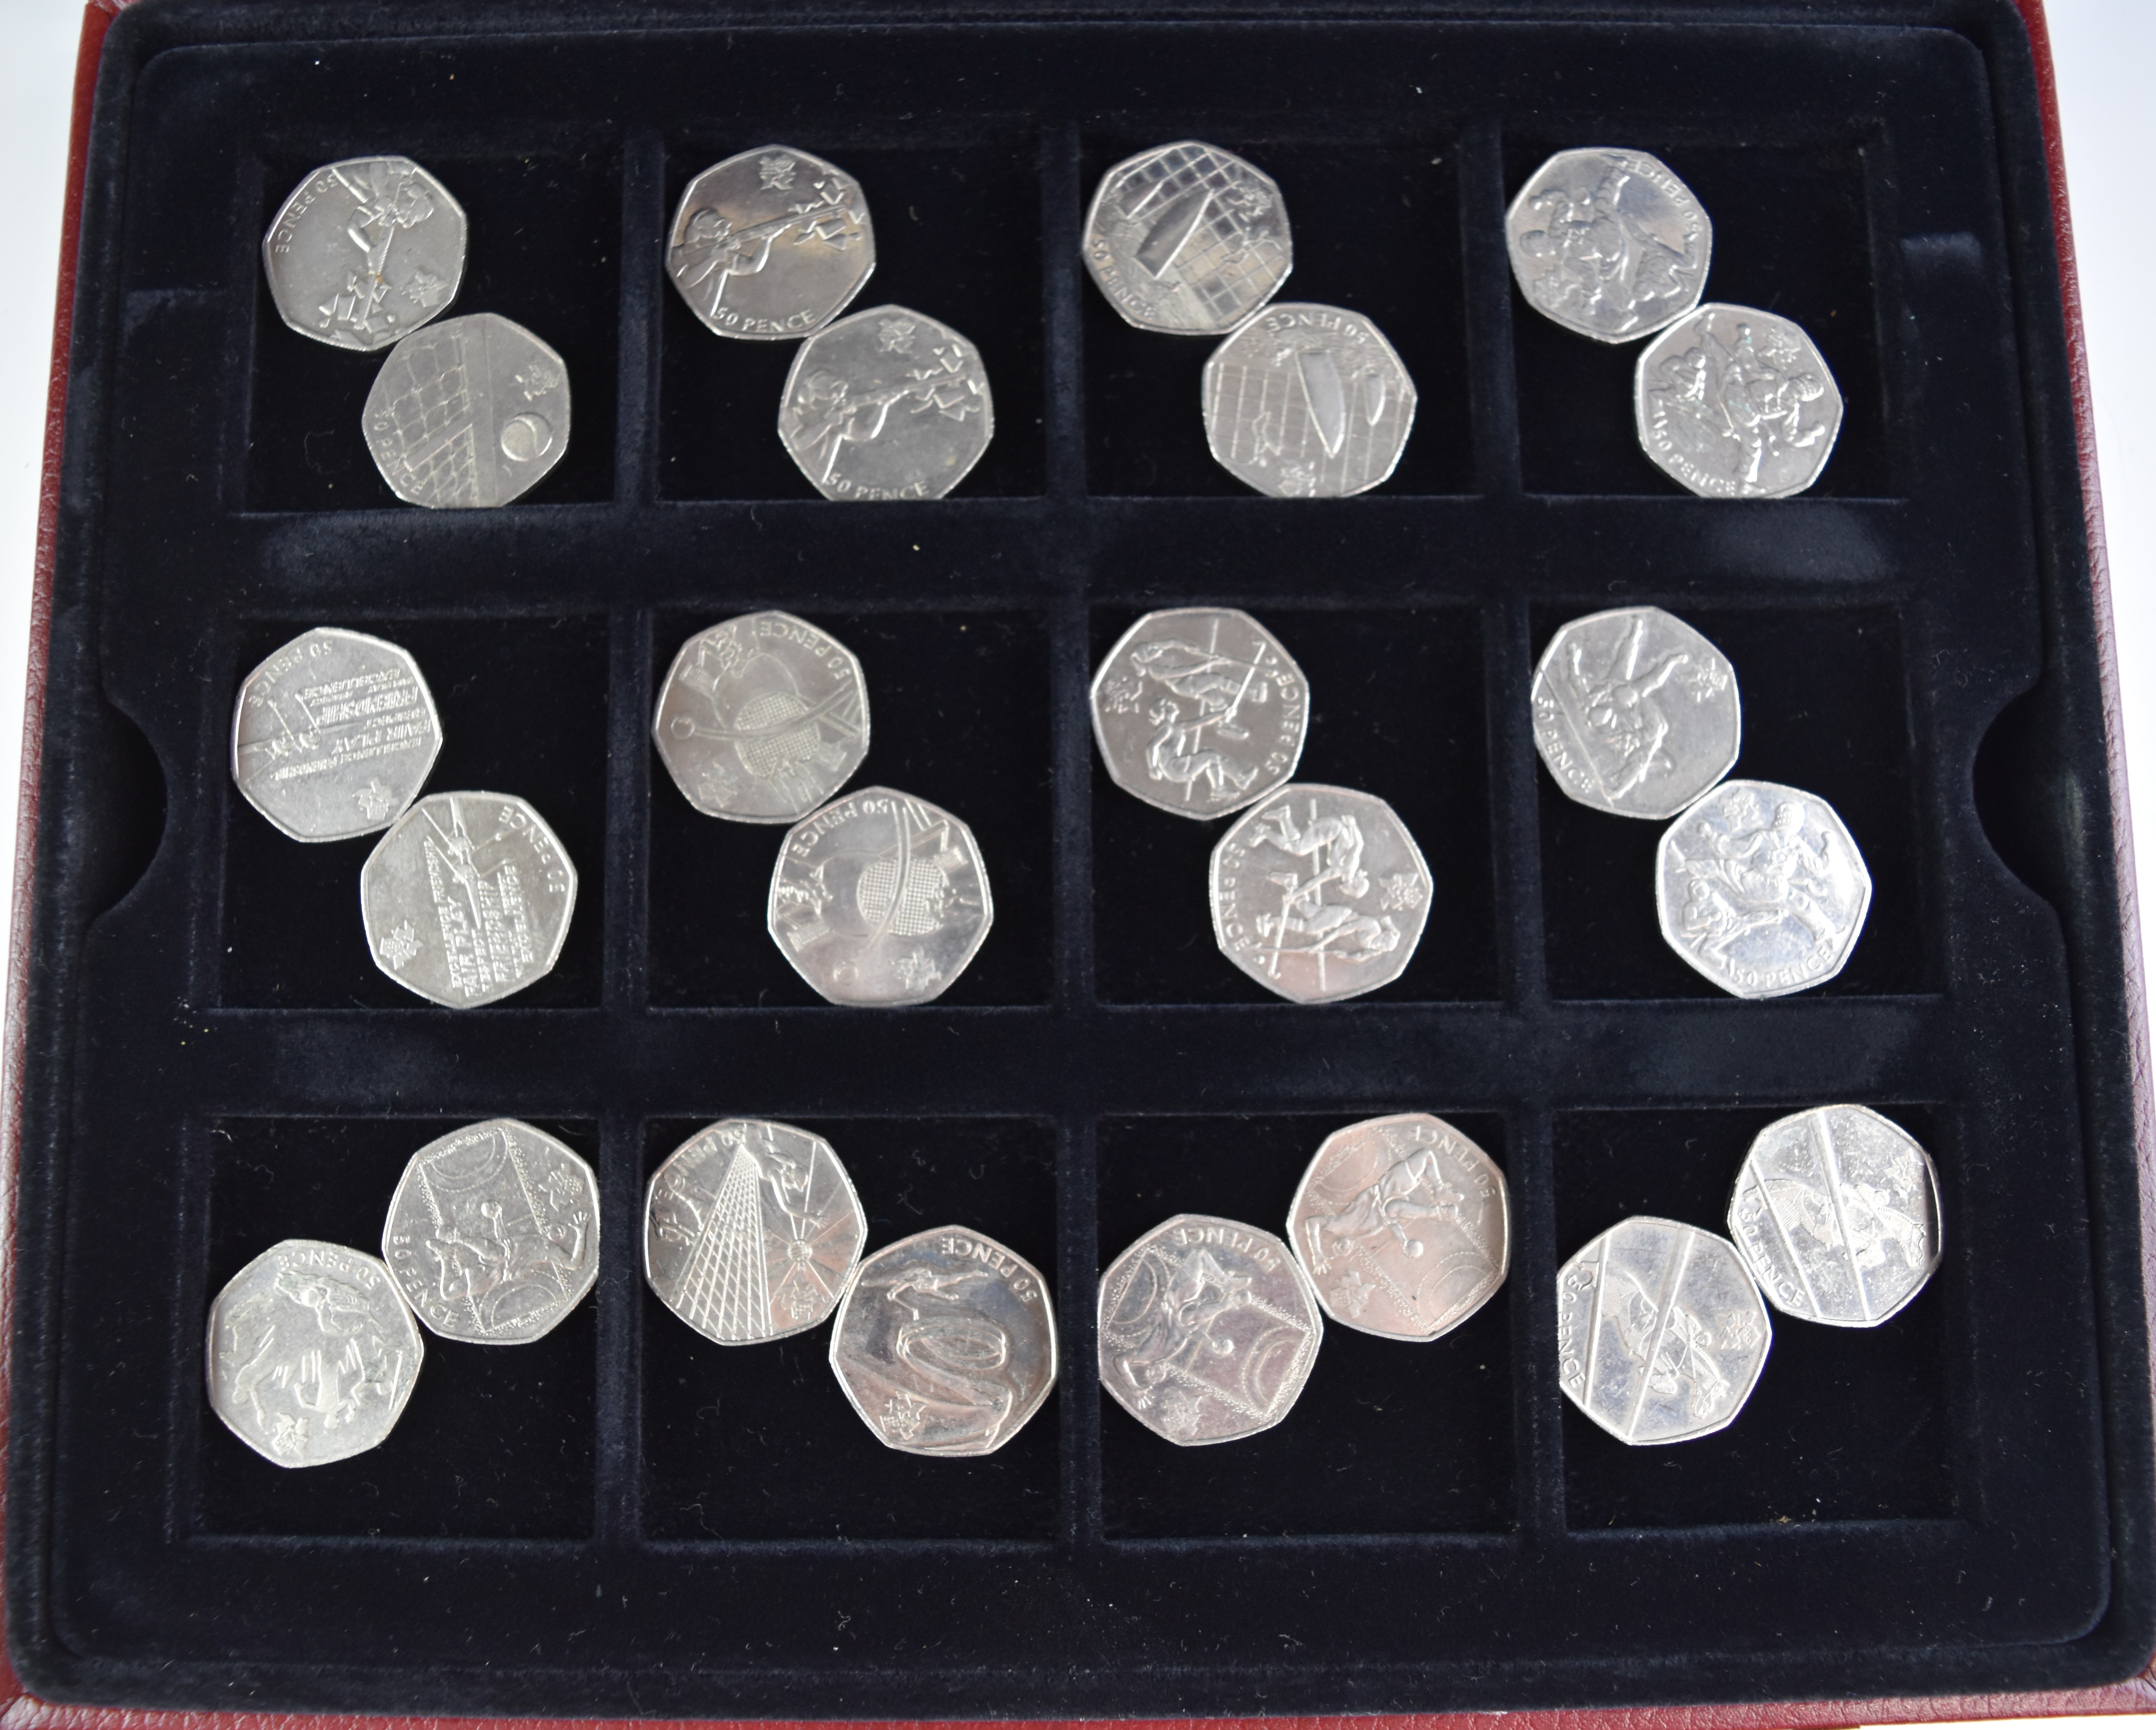 Collectable UK 50p coins including Olympics, in collector's case together with a colourised Euro - Image 2 of 4